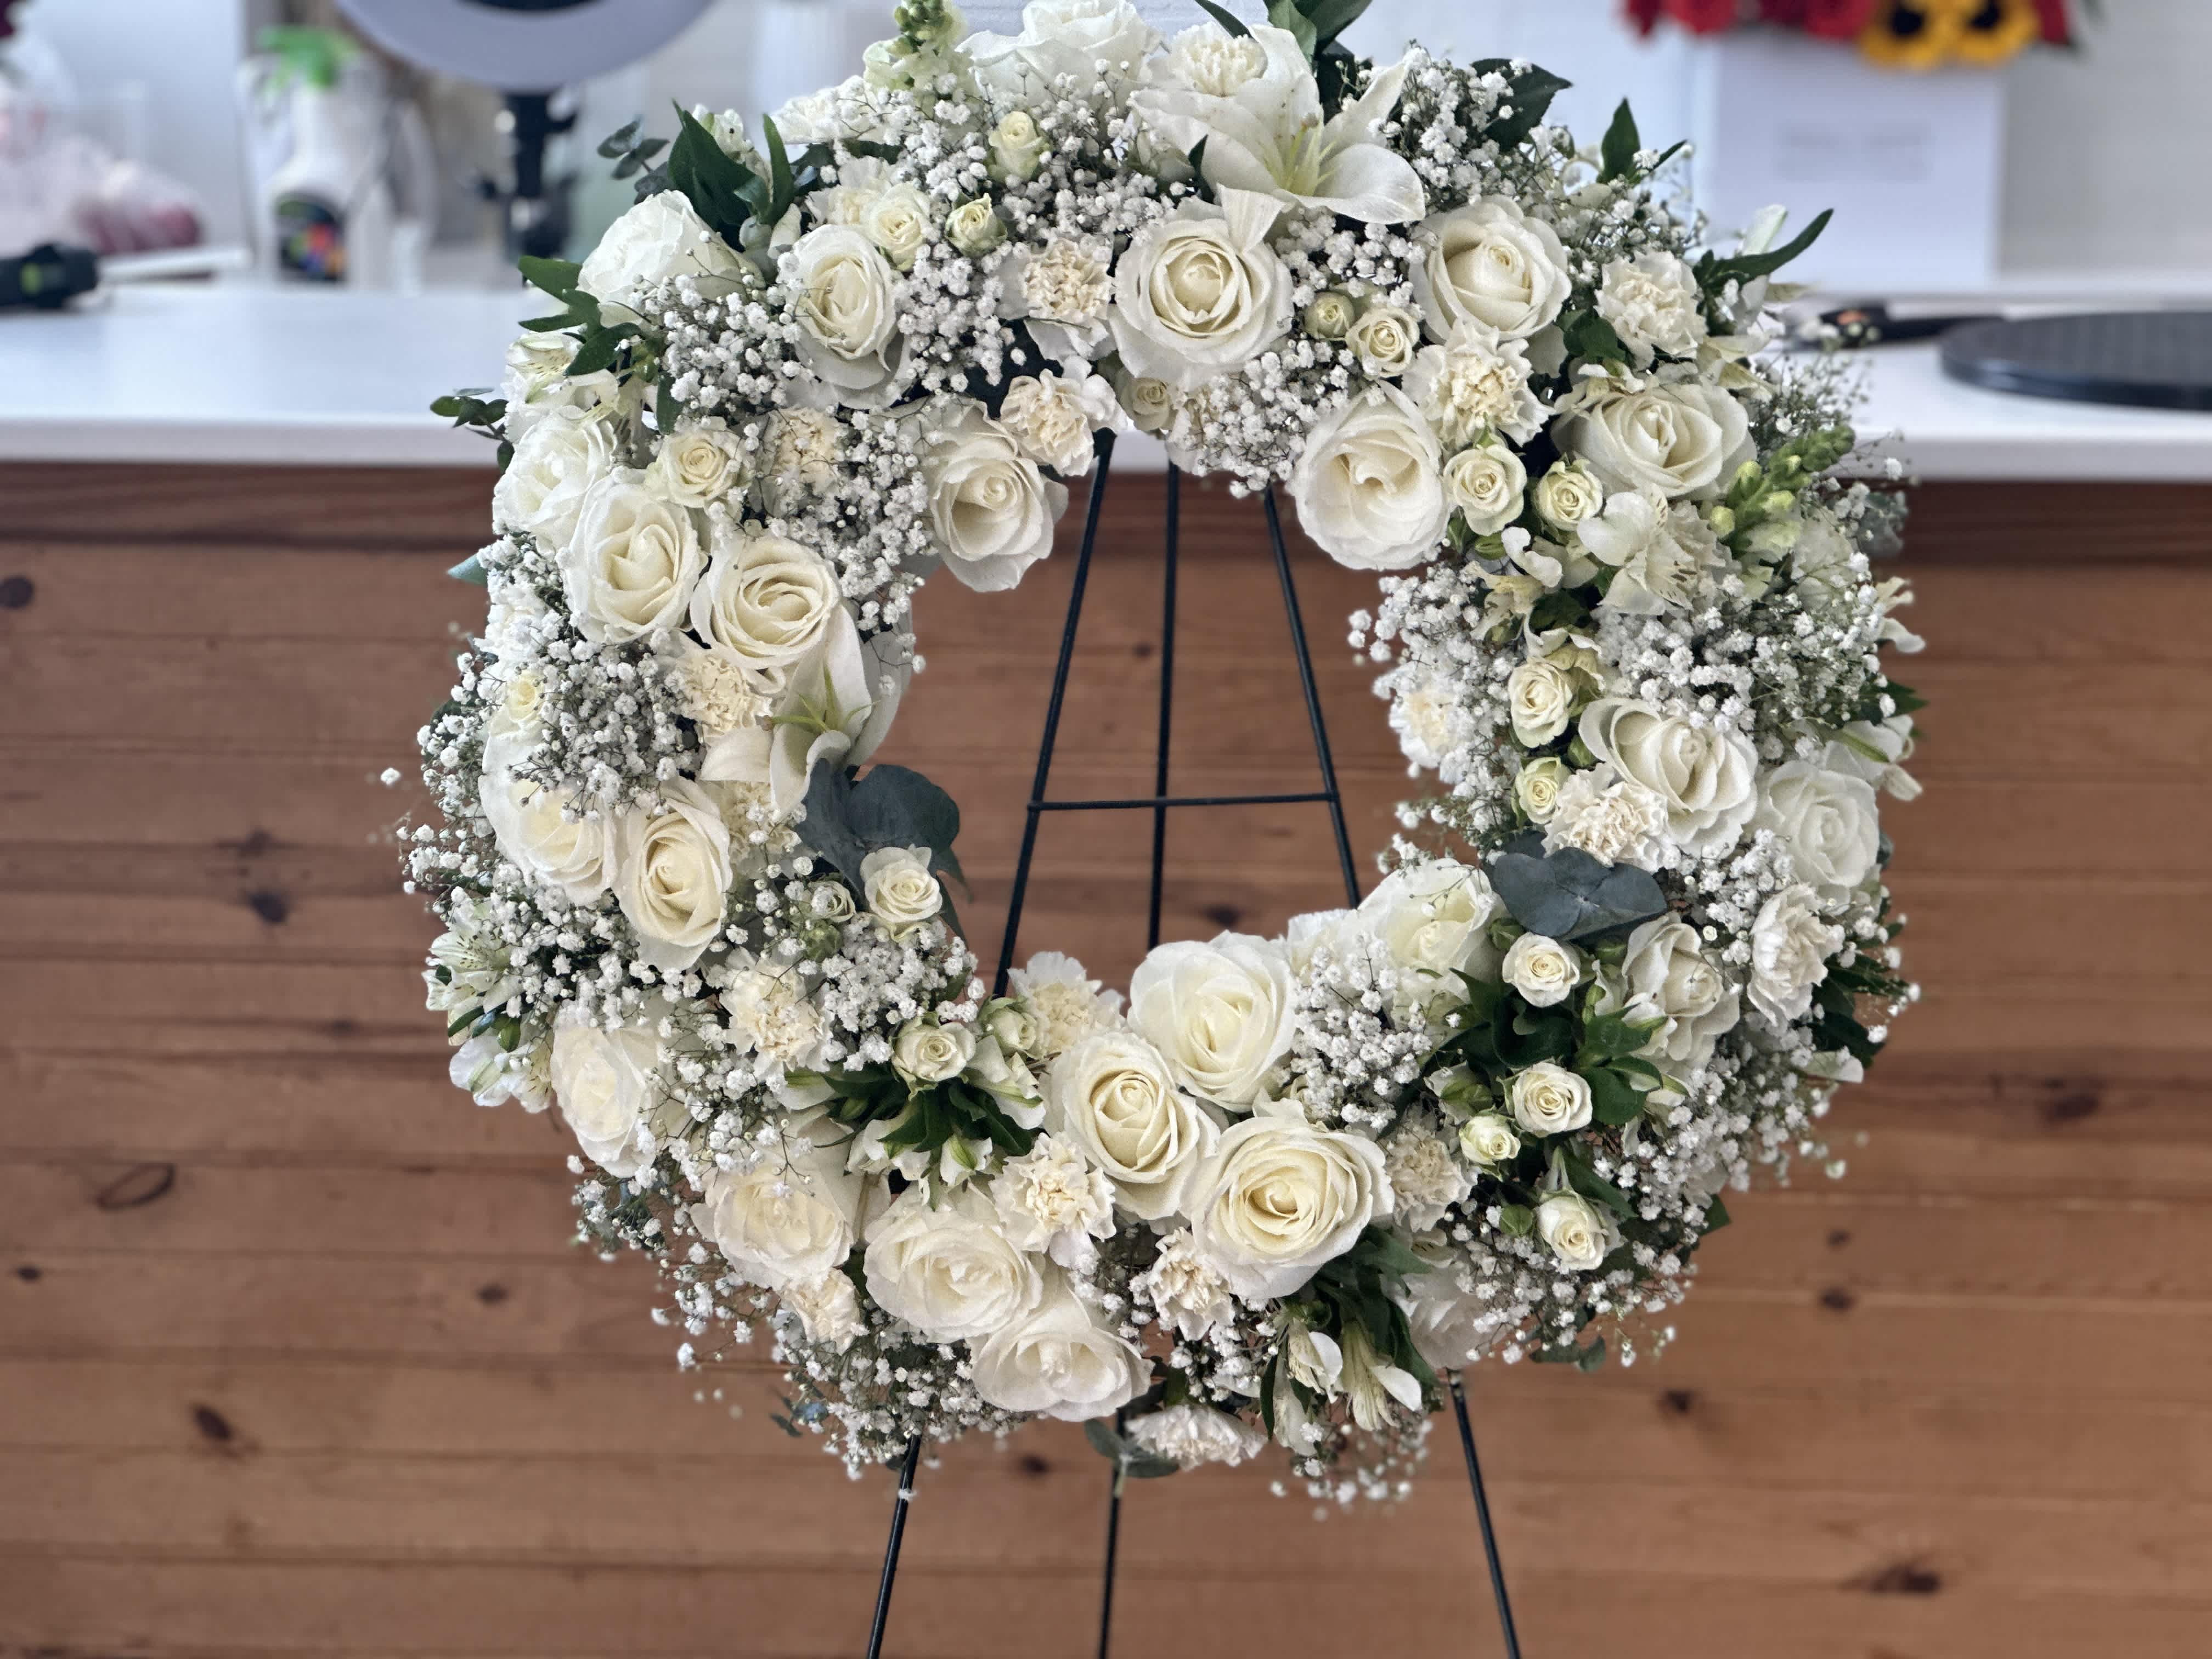 Blanc Femme Memorial Wreath - Introducing the &quot;Blanc Femme Memorial Wreath,&quot; a round wreath composed entirely of white flowers, symbolizing purity and reverence.  Experience the timeless elegance of our Blanc Femme Memorial Wreath, a graceful tribute designed to convey honor and respect during remembrance.  Order now to commemorate with dignity and grace through this beautiful floral arrangement.